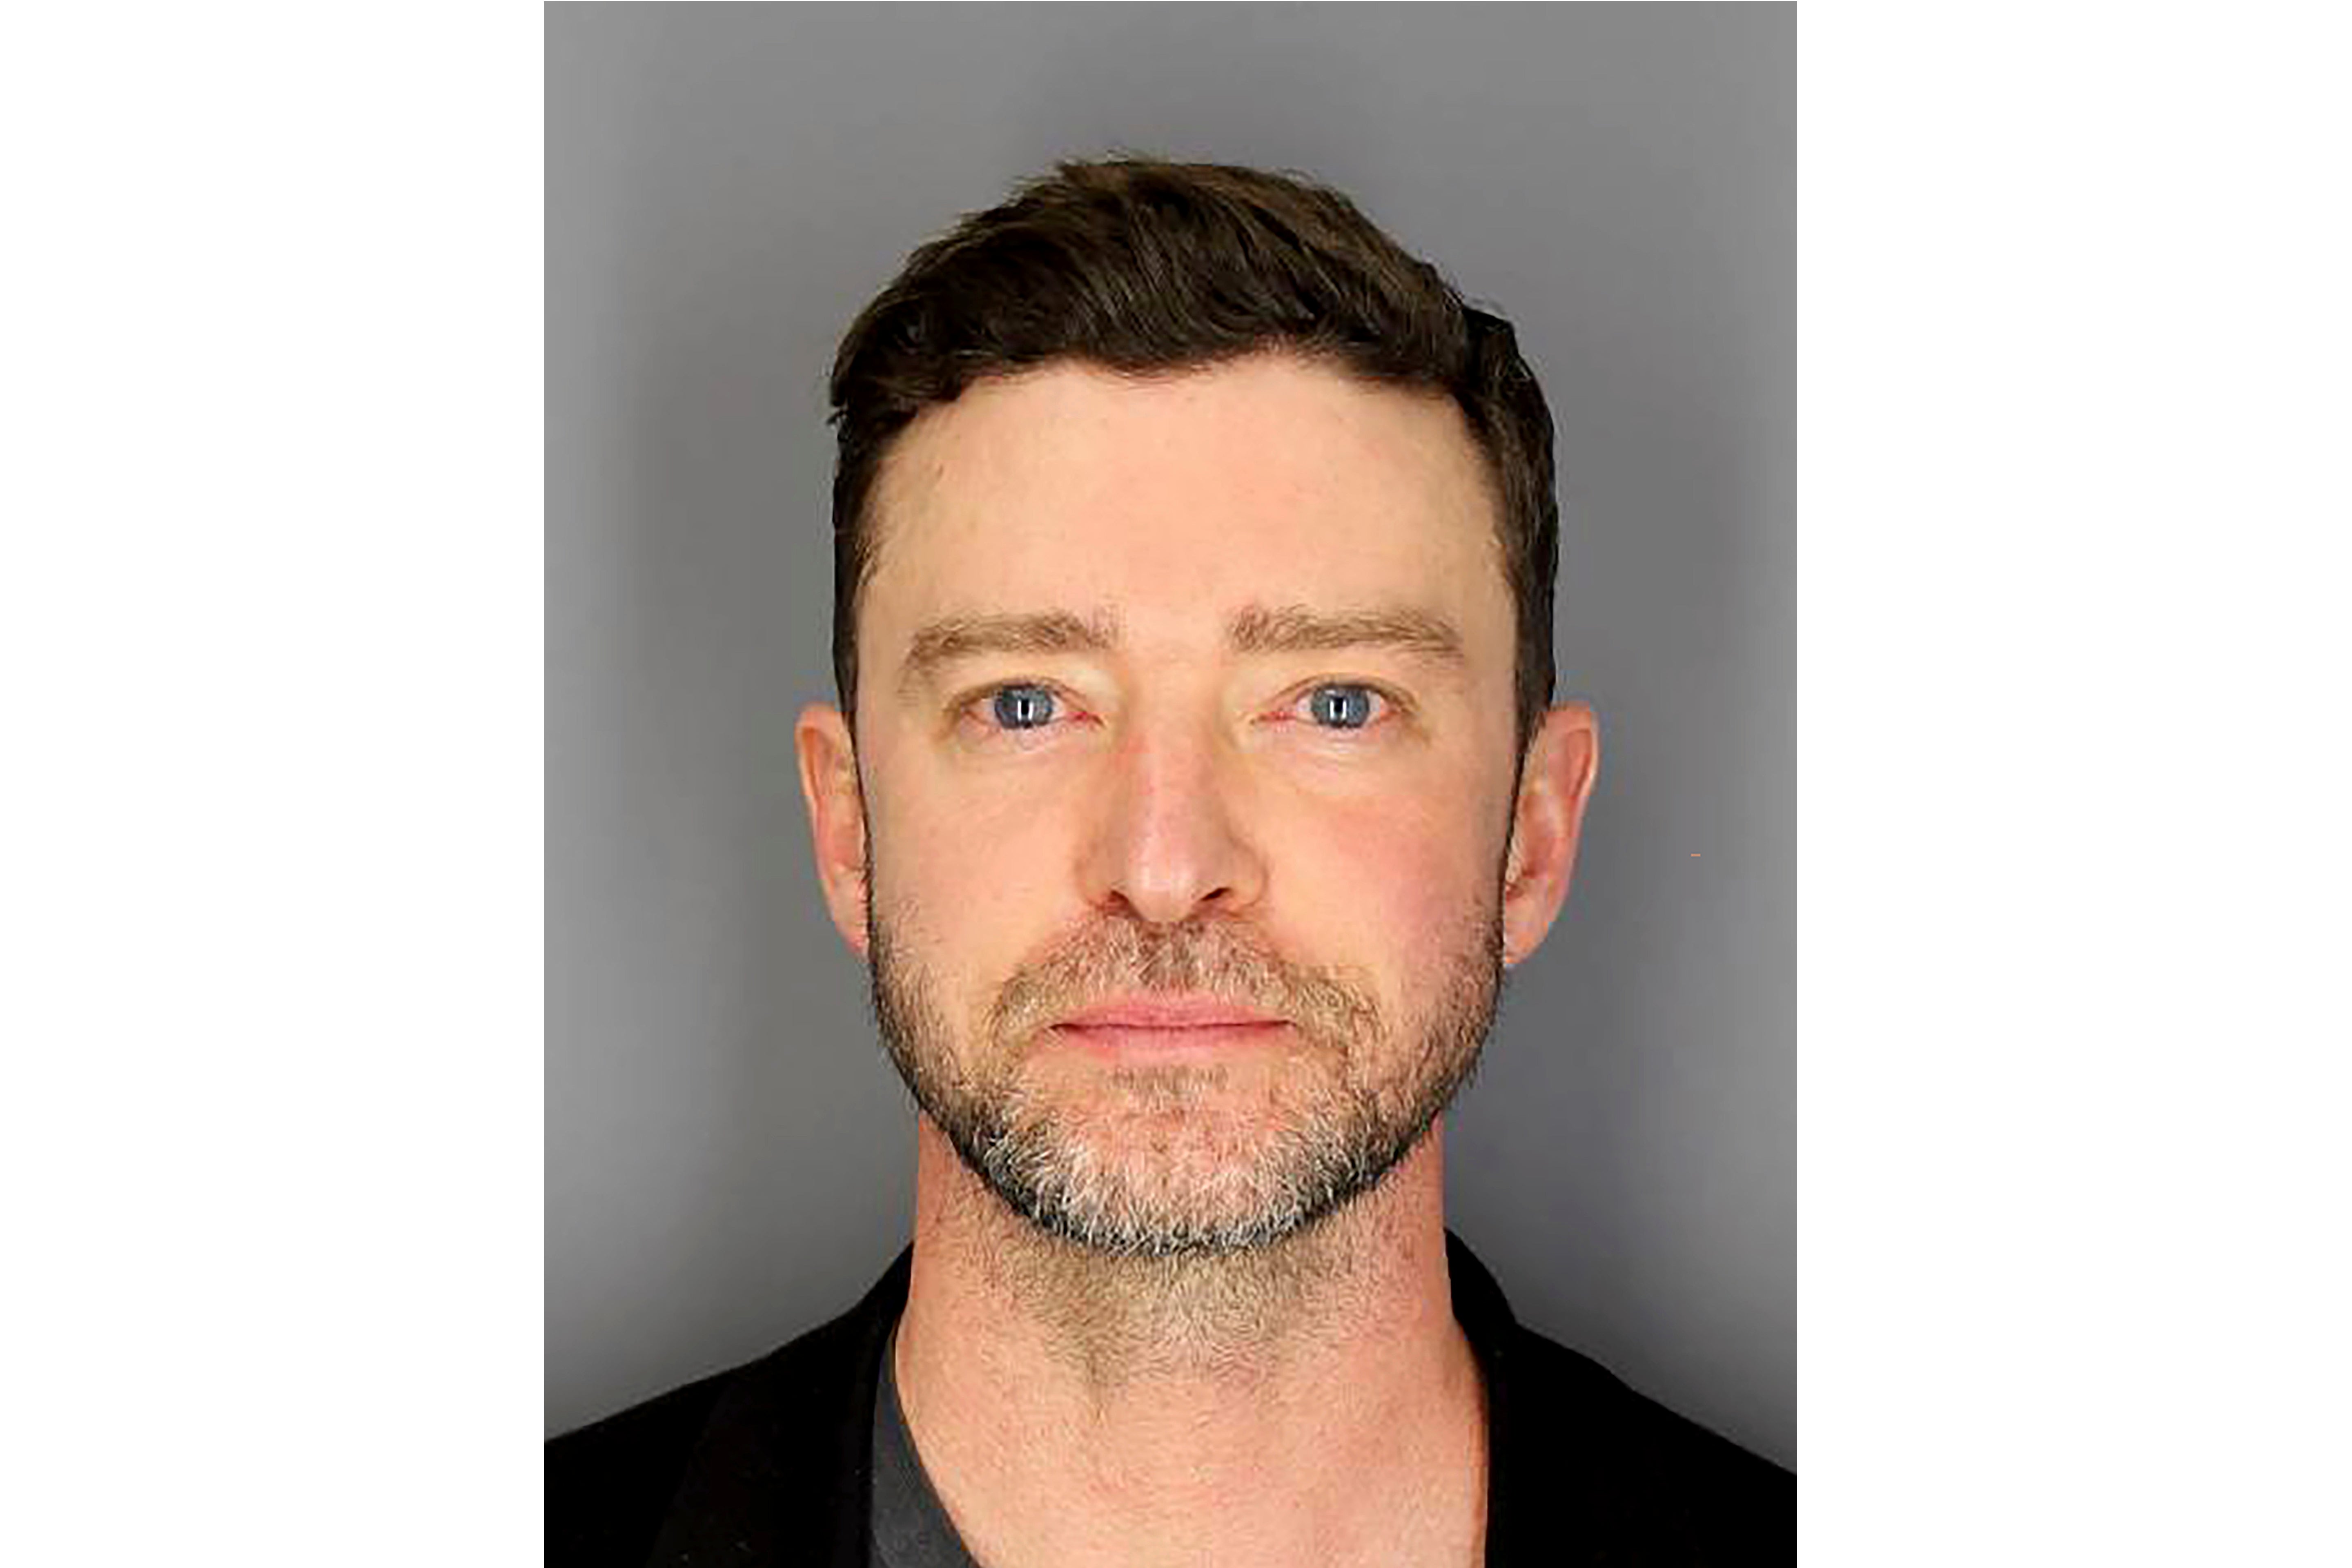 Justin Timberlake was arrested on a DWI charge in the Hamptons. A bartender now says he had a lone martini before leaving and being stopped for DWI